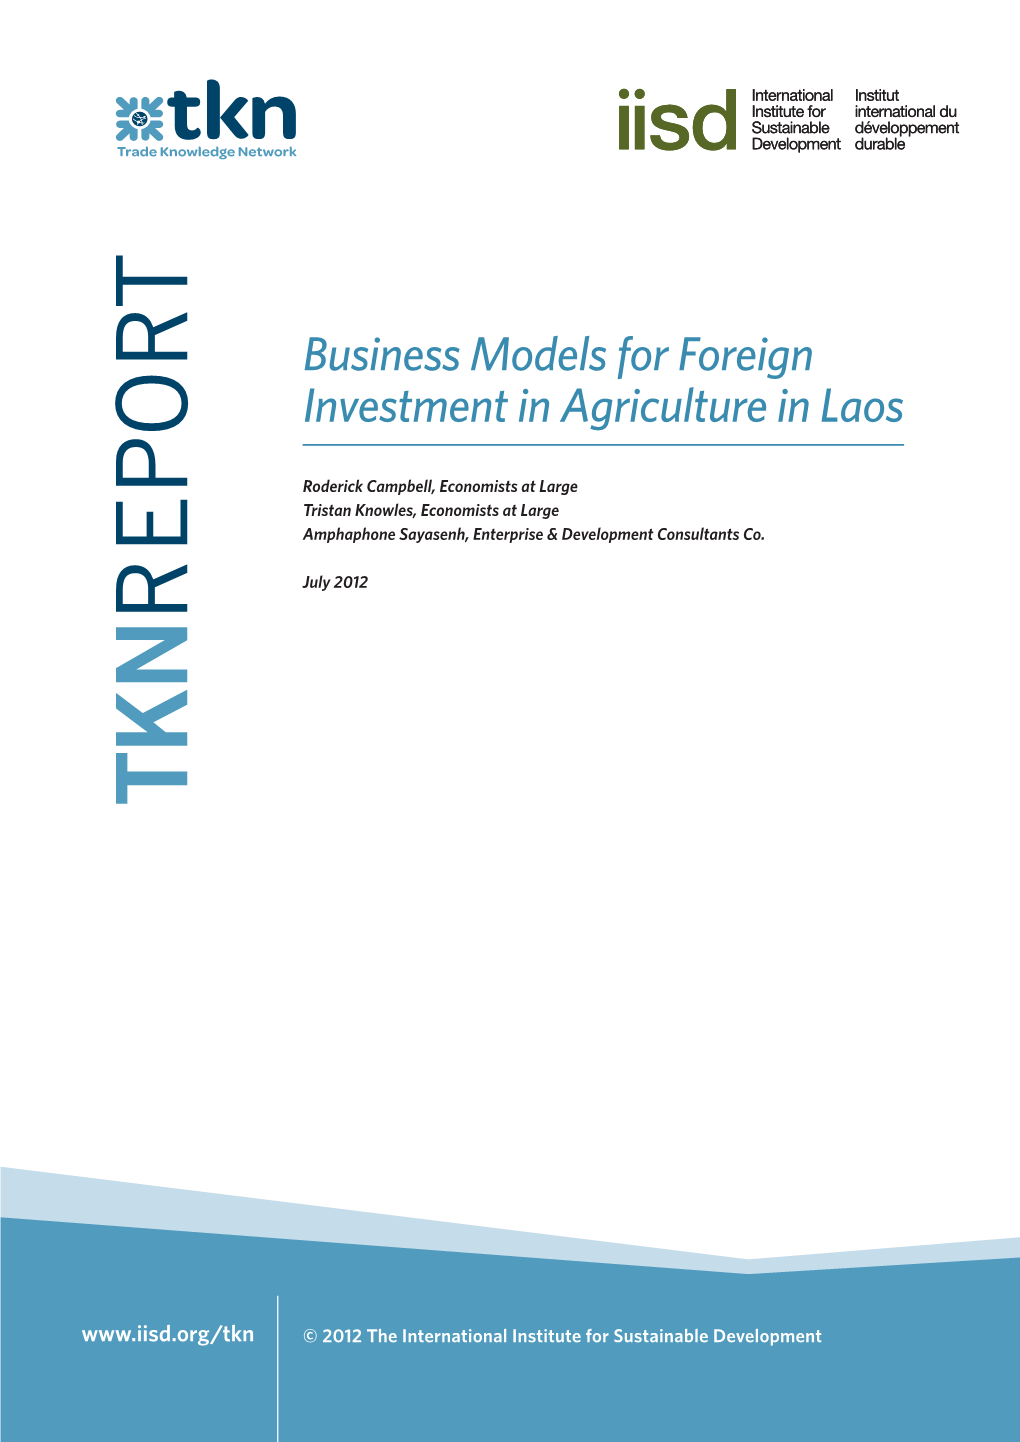 Business Models for Foreign Investment in Agriculture in Laos